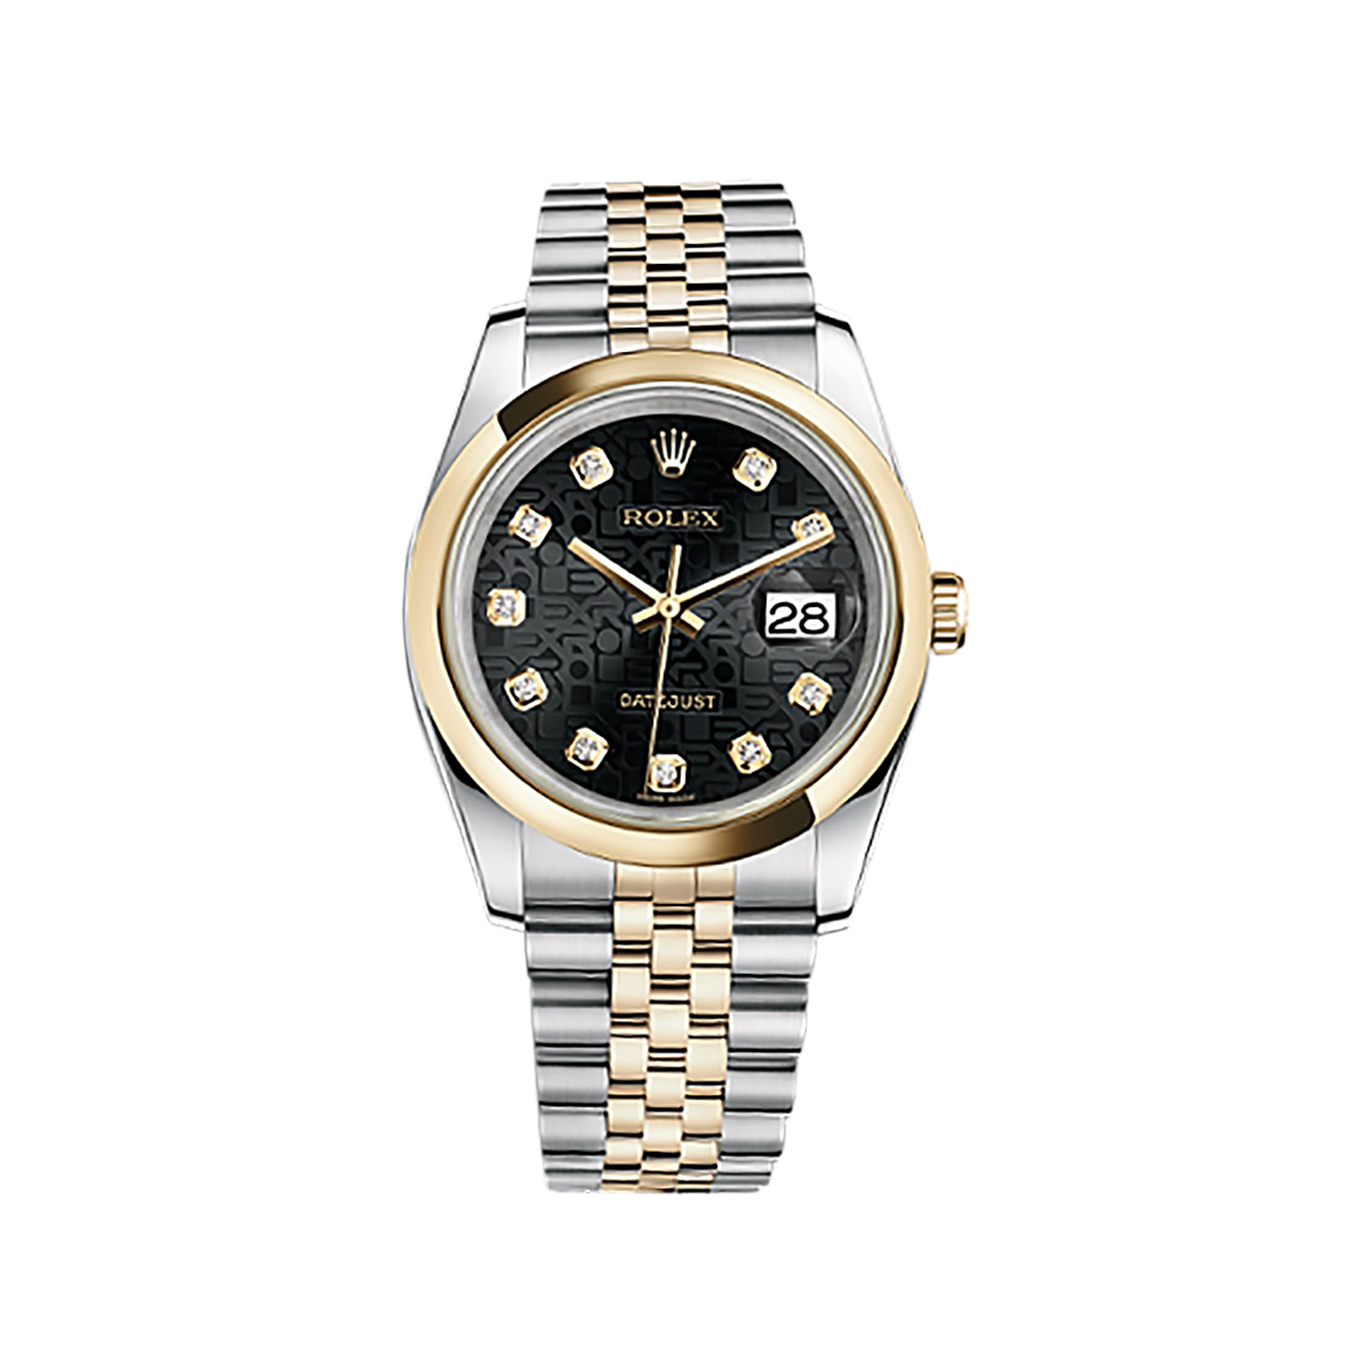 Datejust 36 116203 Gold & Stainless Steel Watch (Black Jubilee Design Set with Diamonds)